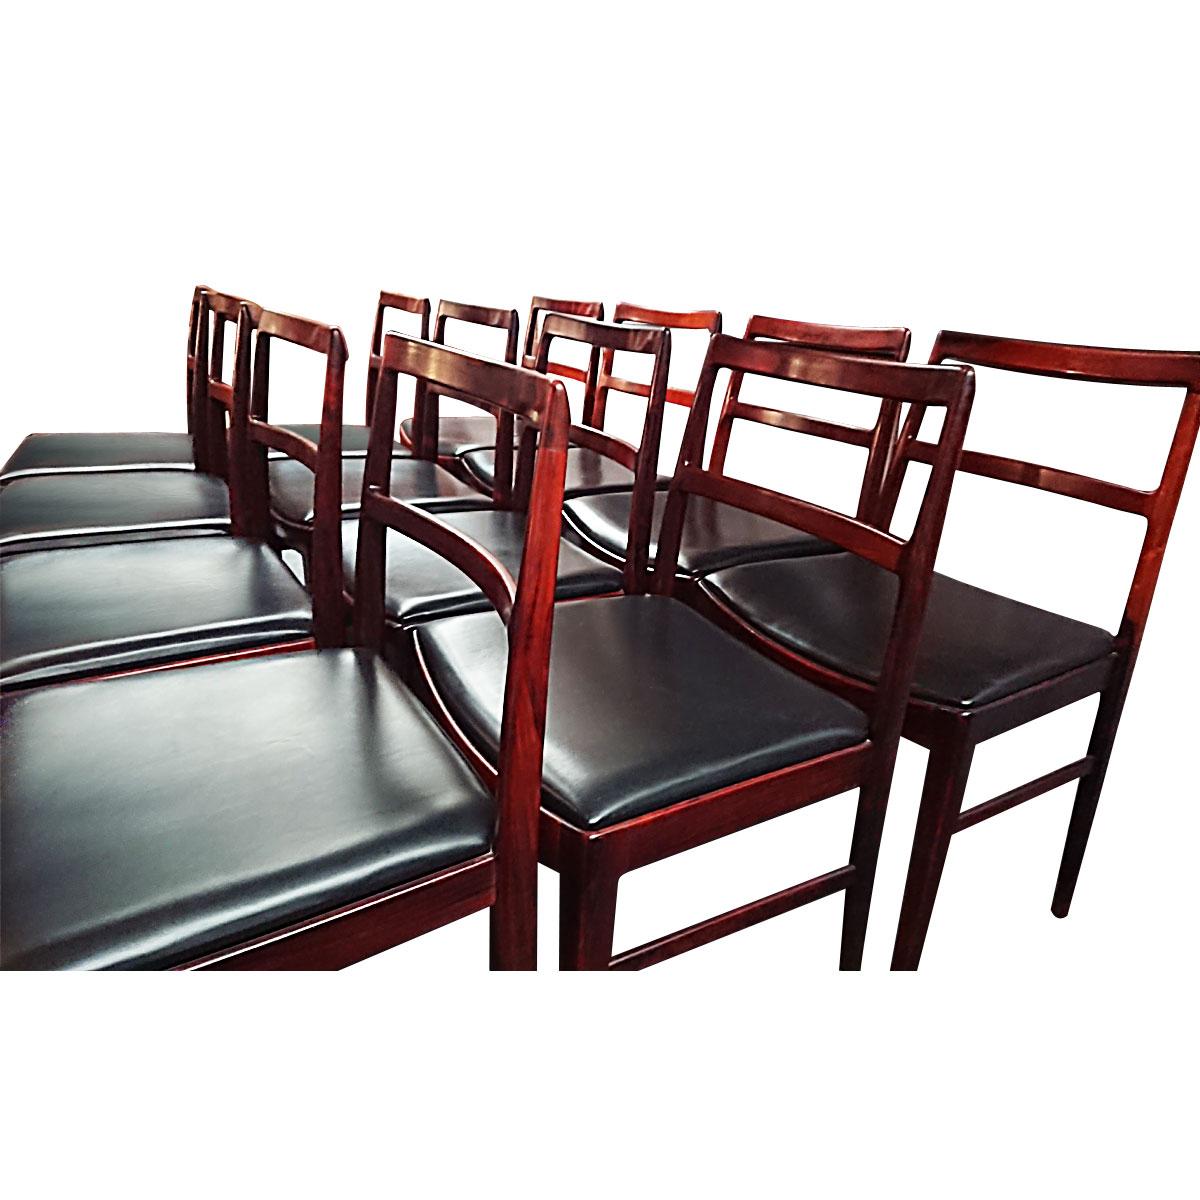 Arne Vodder Danish Midcentury 201 Rosewood Dining Table with Twelve 430 Chairs 7